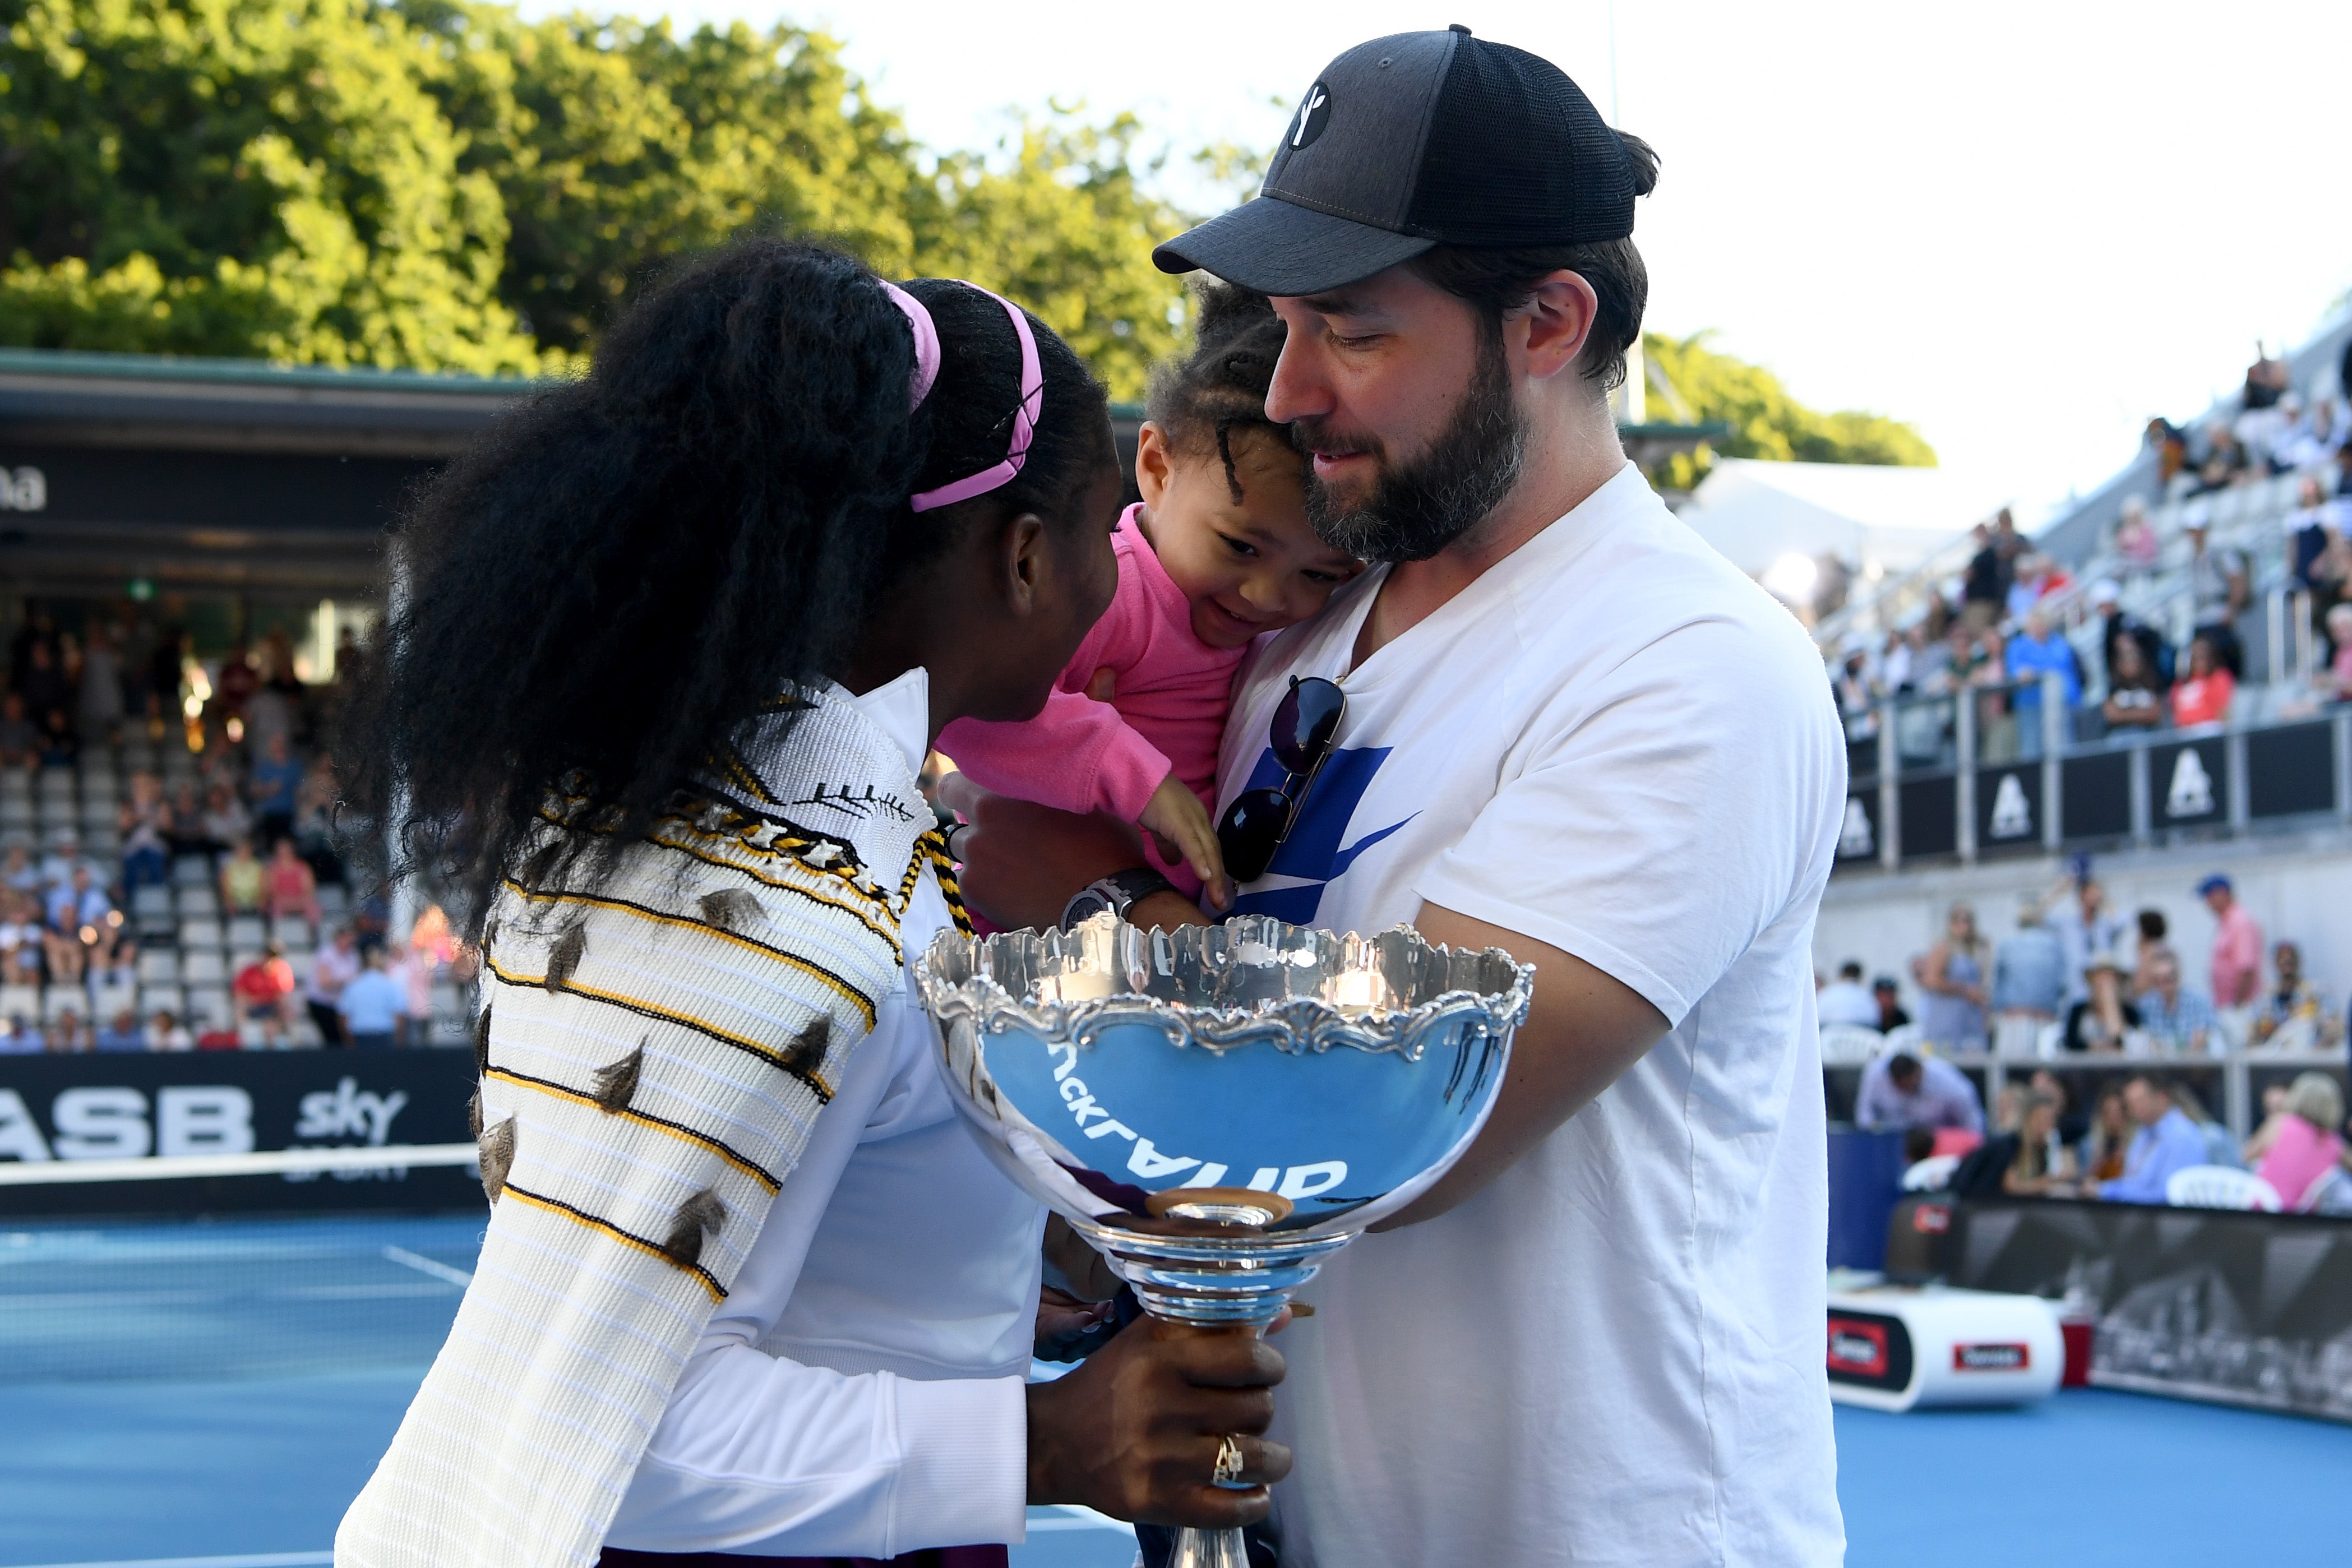 Alexis Olympia, daughter of Serena Williams and husband Alexis Ohanian congratulate Serena Williams after she won her final match against Jessica Pegula of USA at ASB Tennis Centre on January 12, 2020